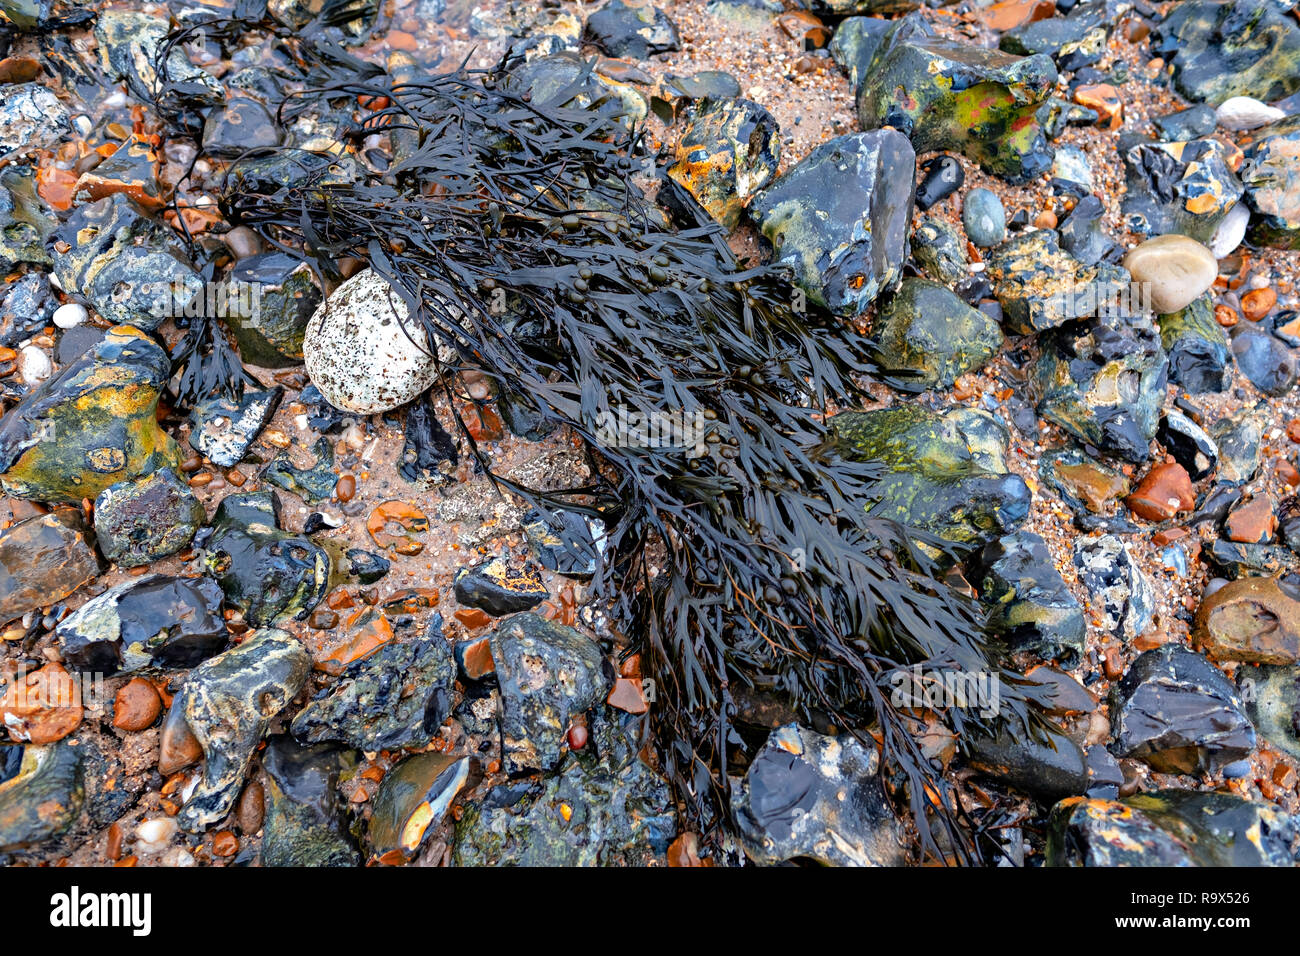 West Runton Beach littered with seaweed , pebbles and sand after the tide had gone out. Stock Photo